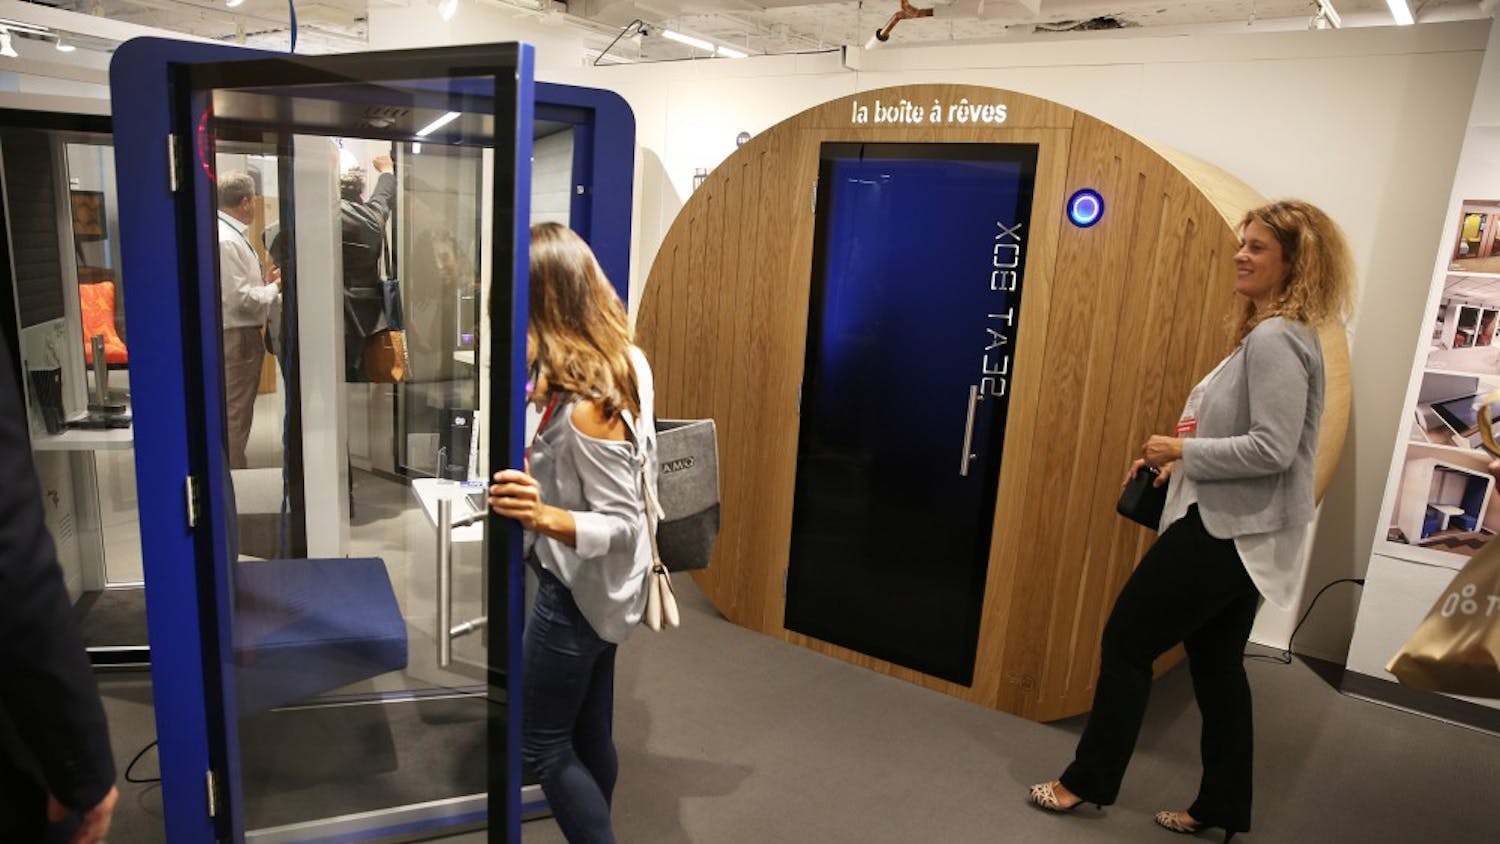 A number of manufacturers have come up with office "sleep pods," designed for a power nap or more elaborate relaxation techniques.&nbsp;